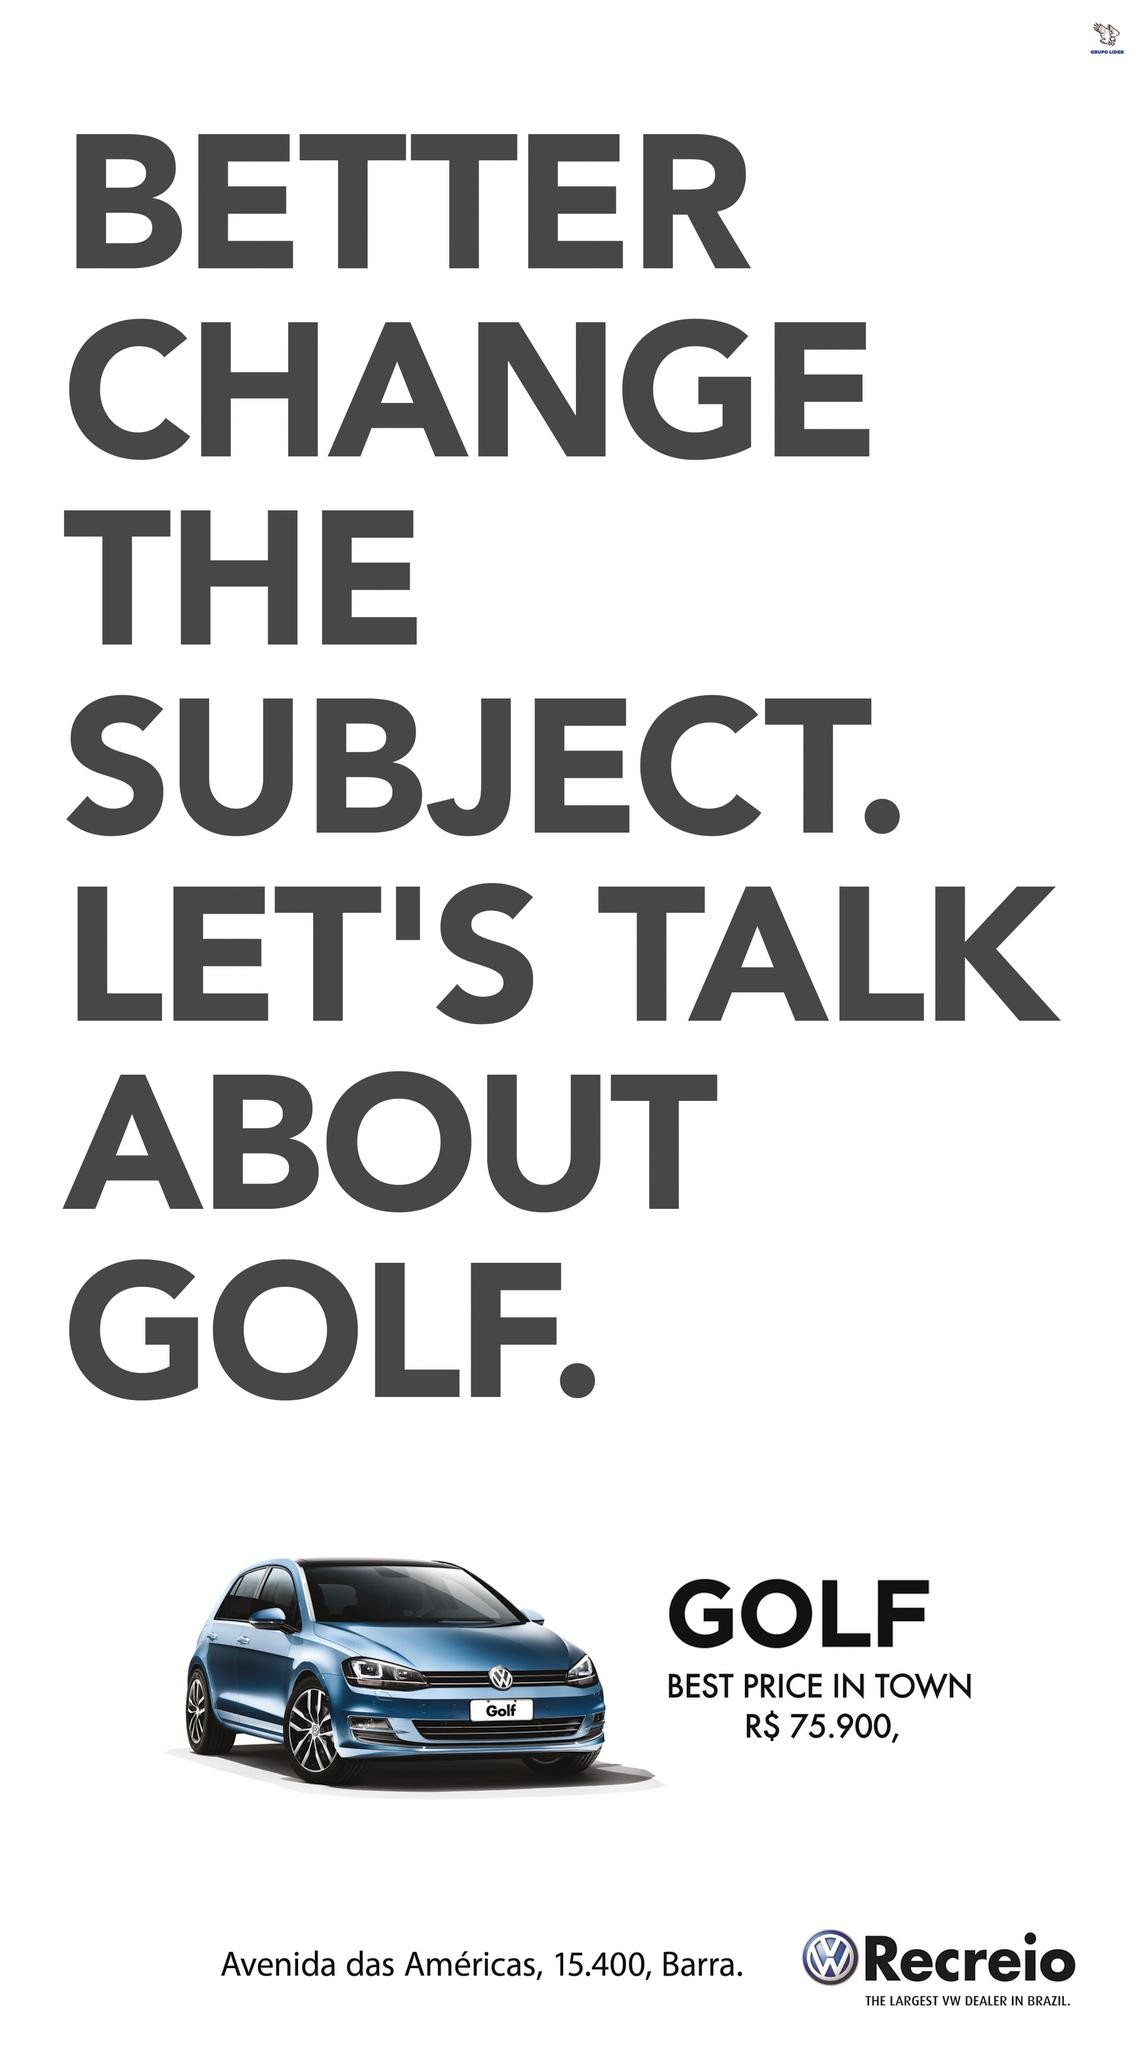 BETTER CHANGE SUBJECT. LET'S TALK ABOUT GOLF.